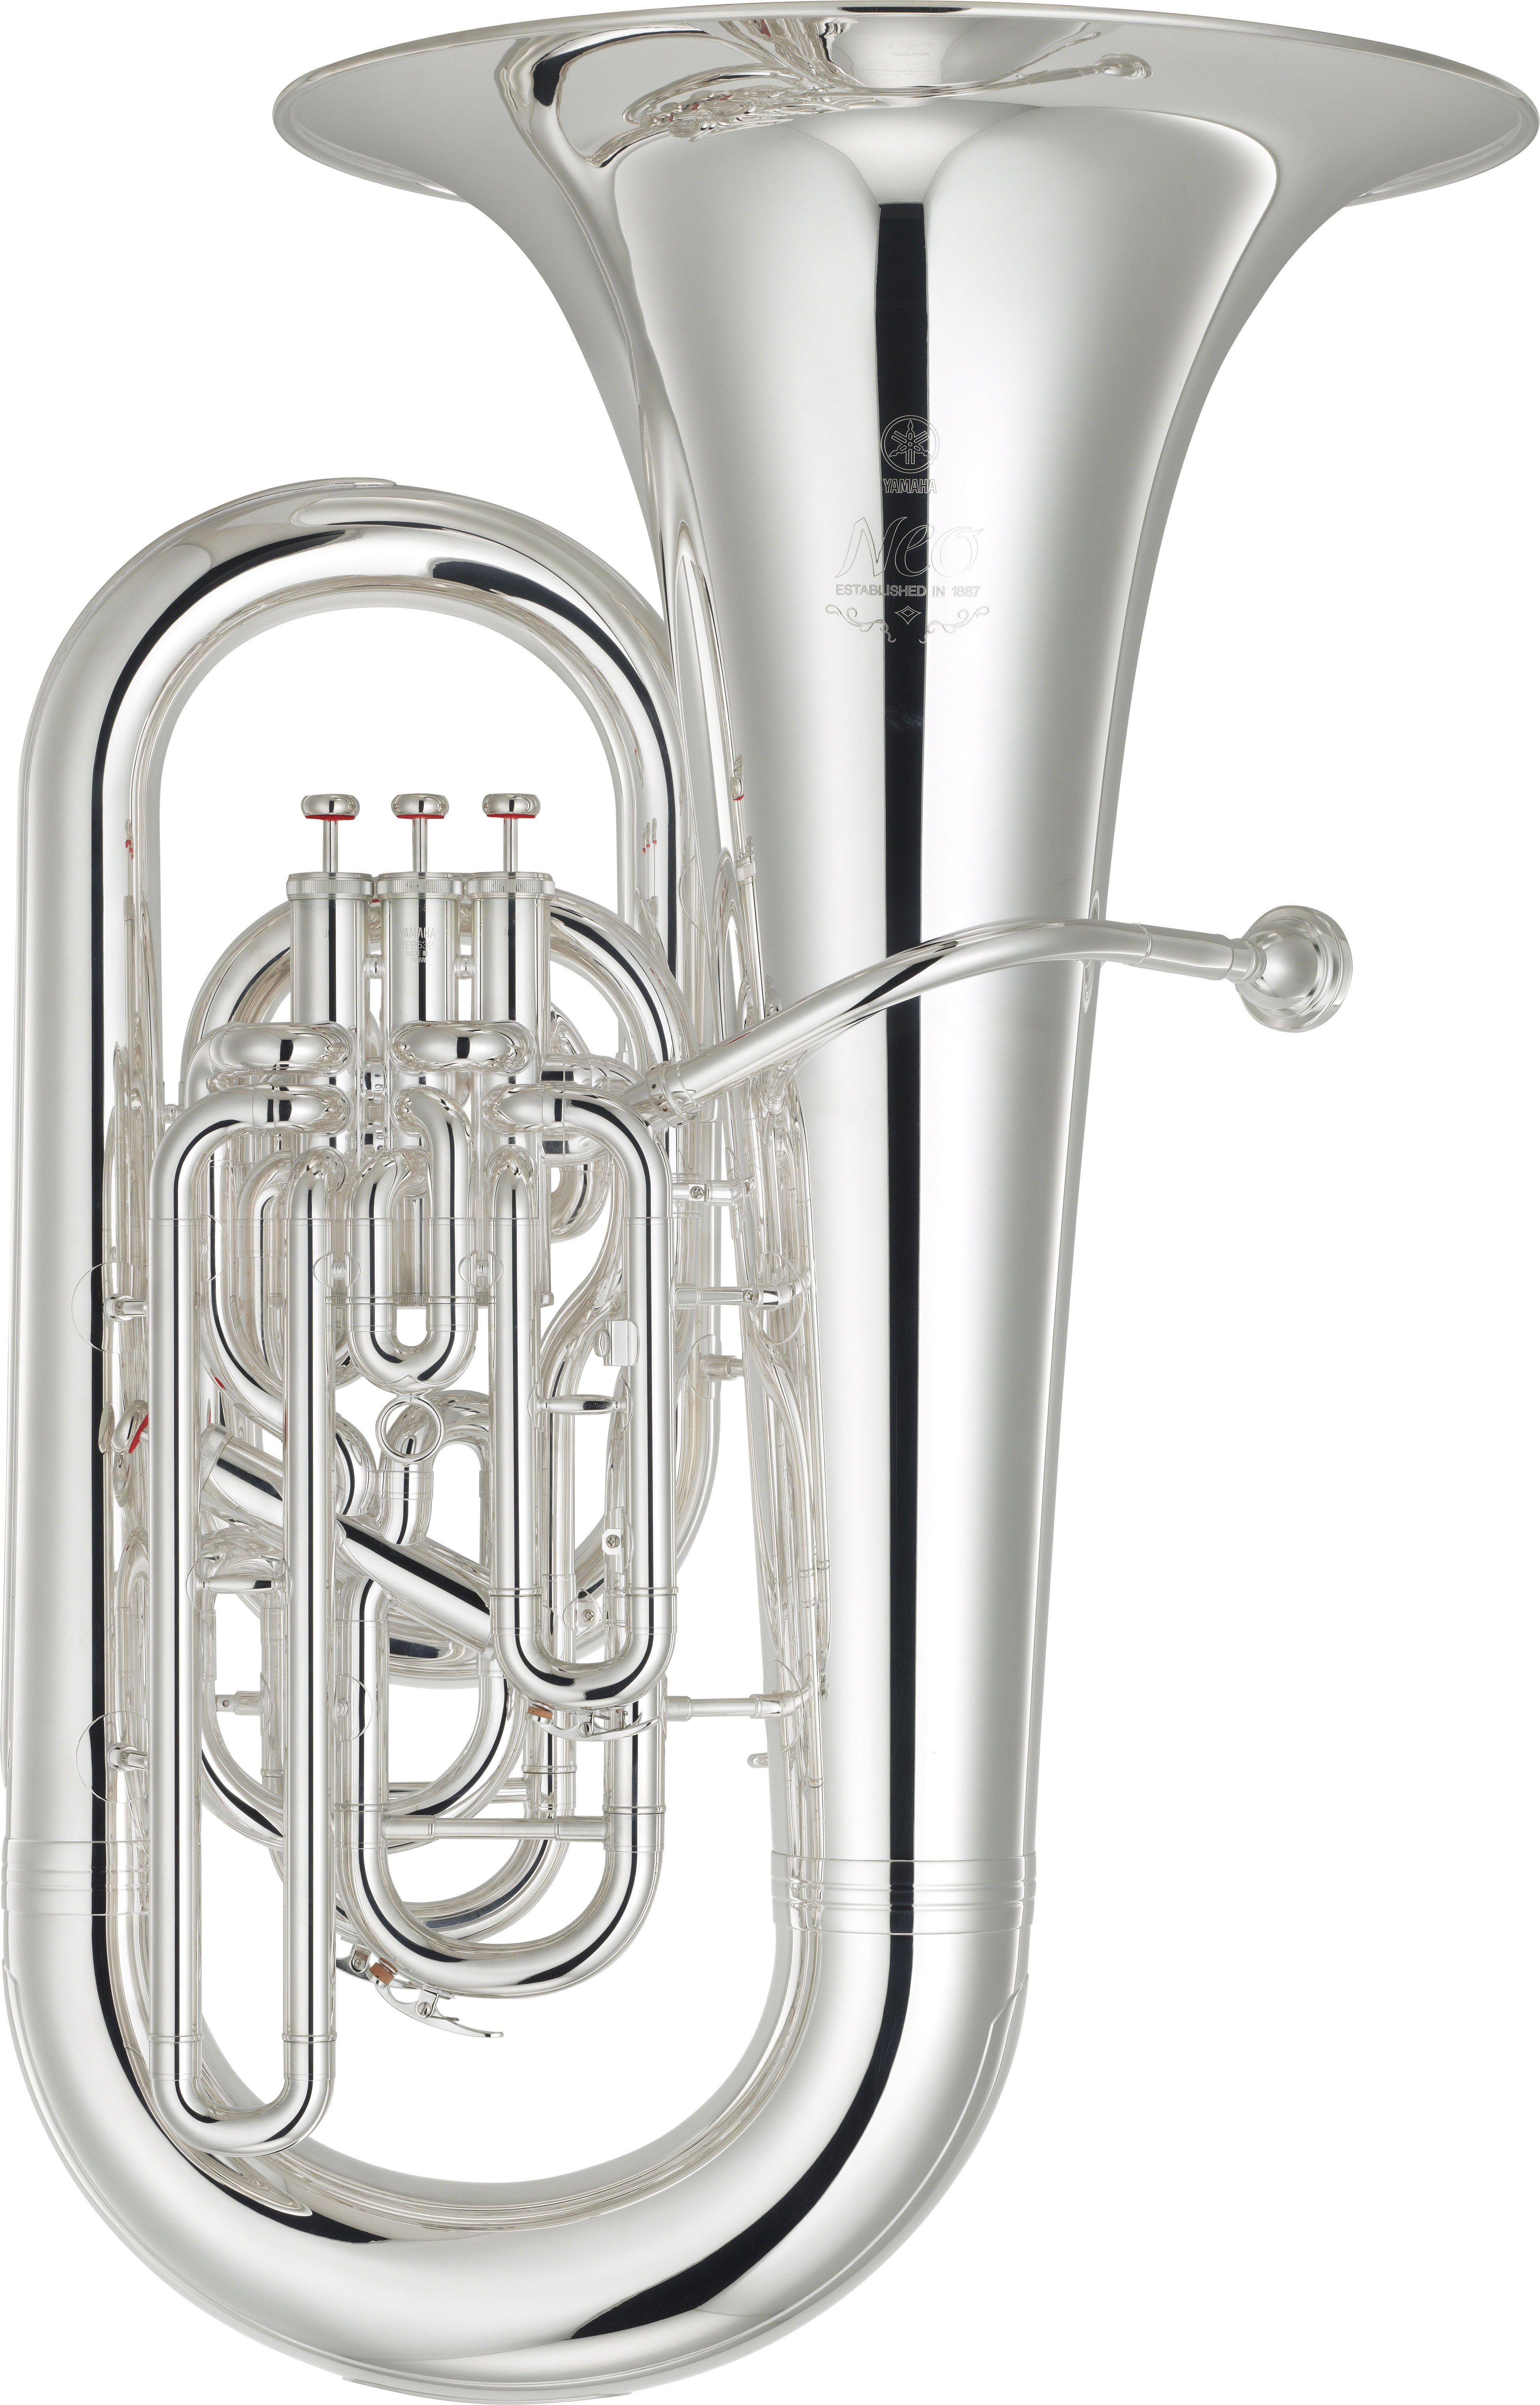 YEB-632S - Overview - Tubas - Brass u0026 Woodwinds - Musical Instruments -  Products - Yamaha - Africa / Asia / CIS / Latin America / Middle East /  Oceania